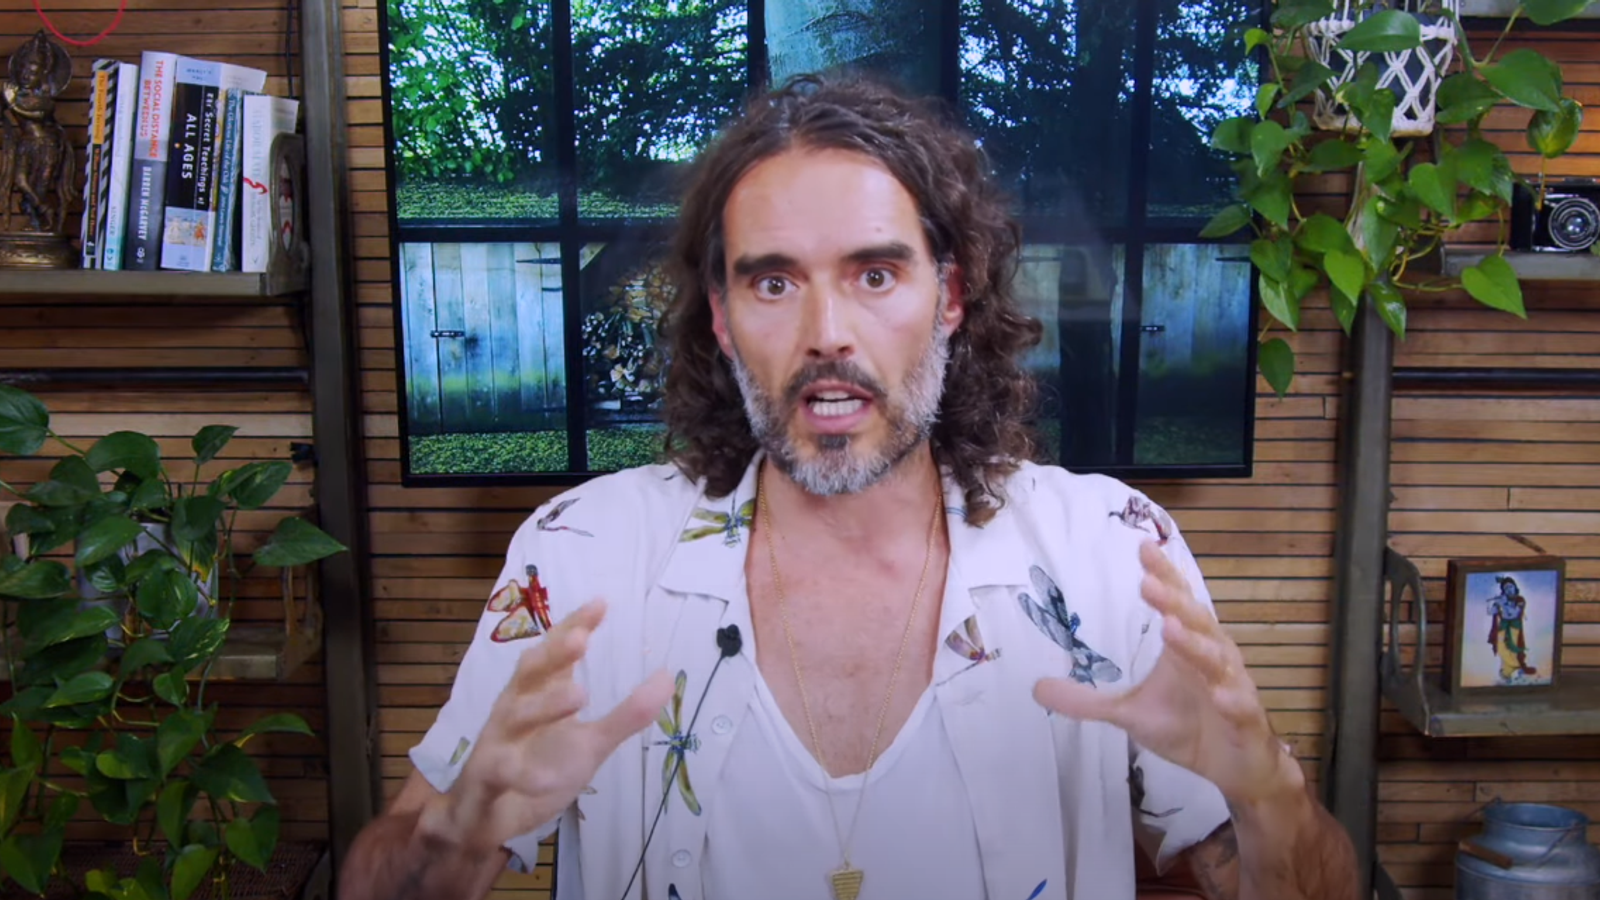 Met Police responds to Russell Brand claims - and urges sexual assault victims to contact force